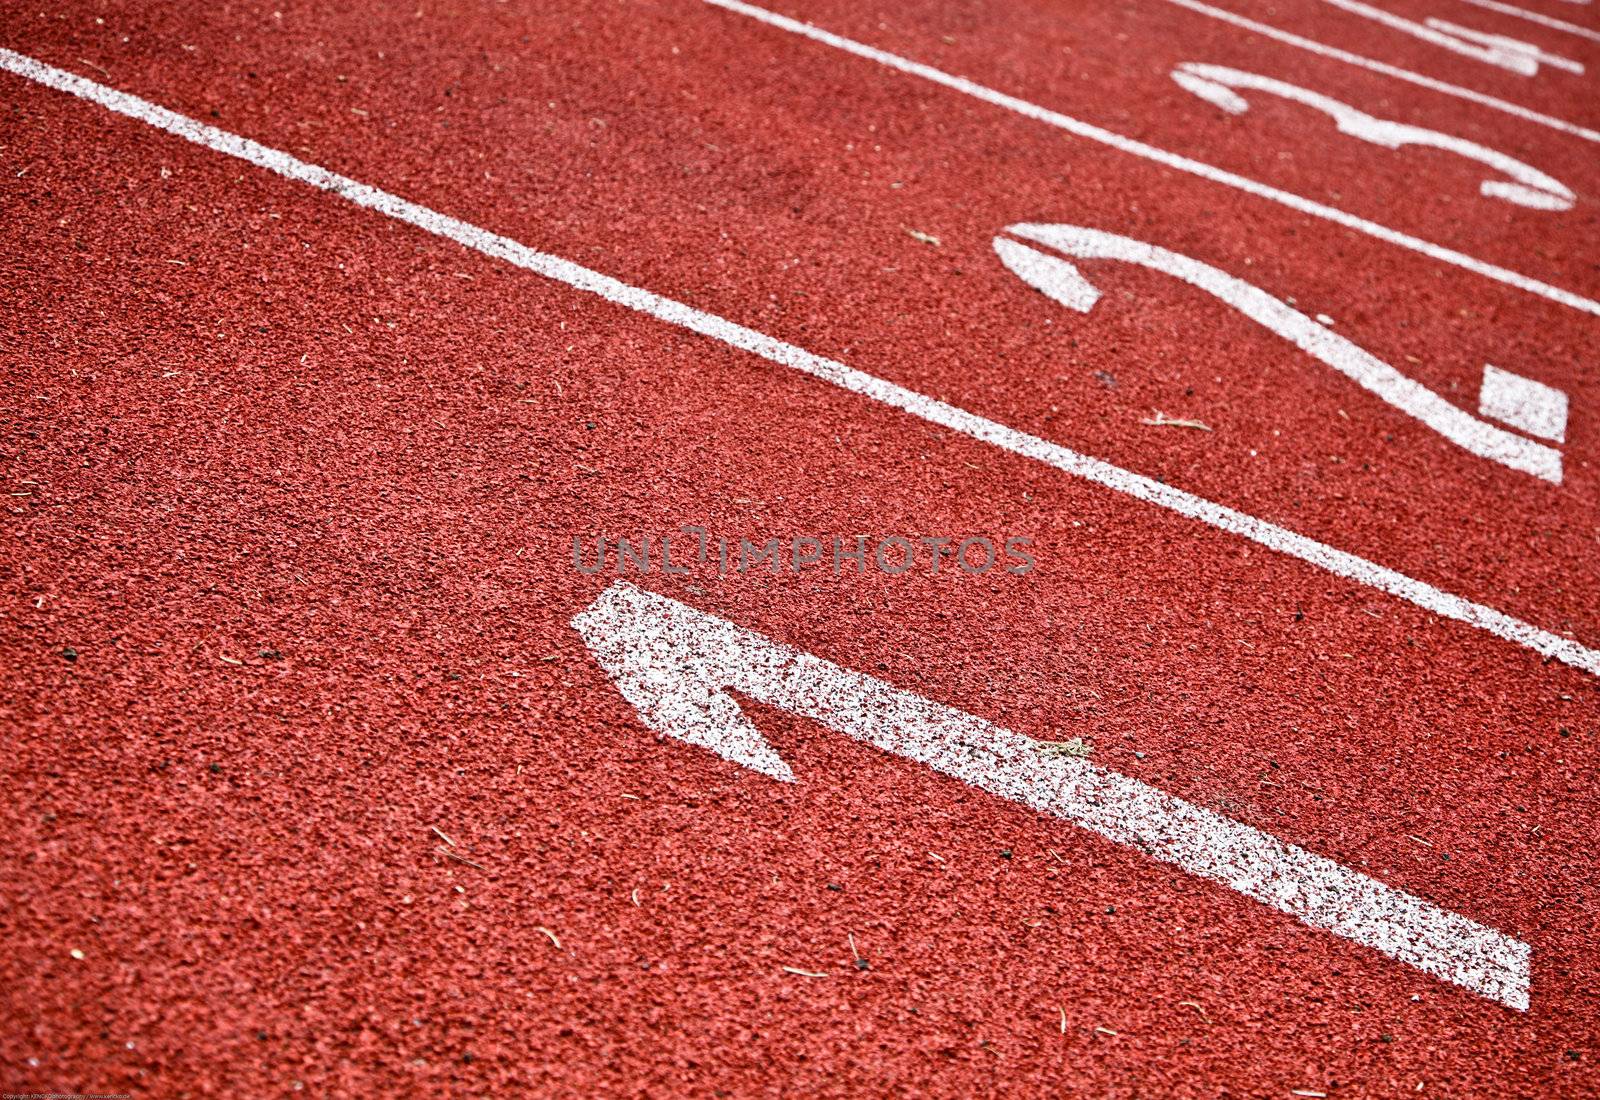 Closeup Of Numbered Running Track Lanes by nfx702